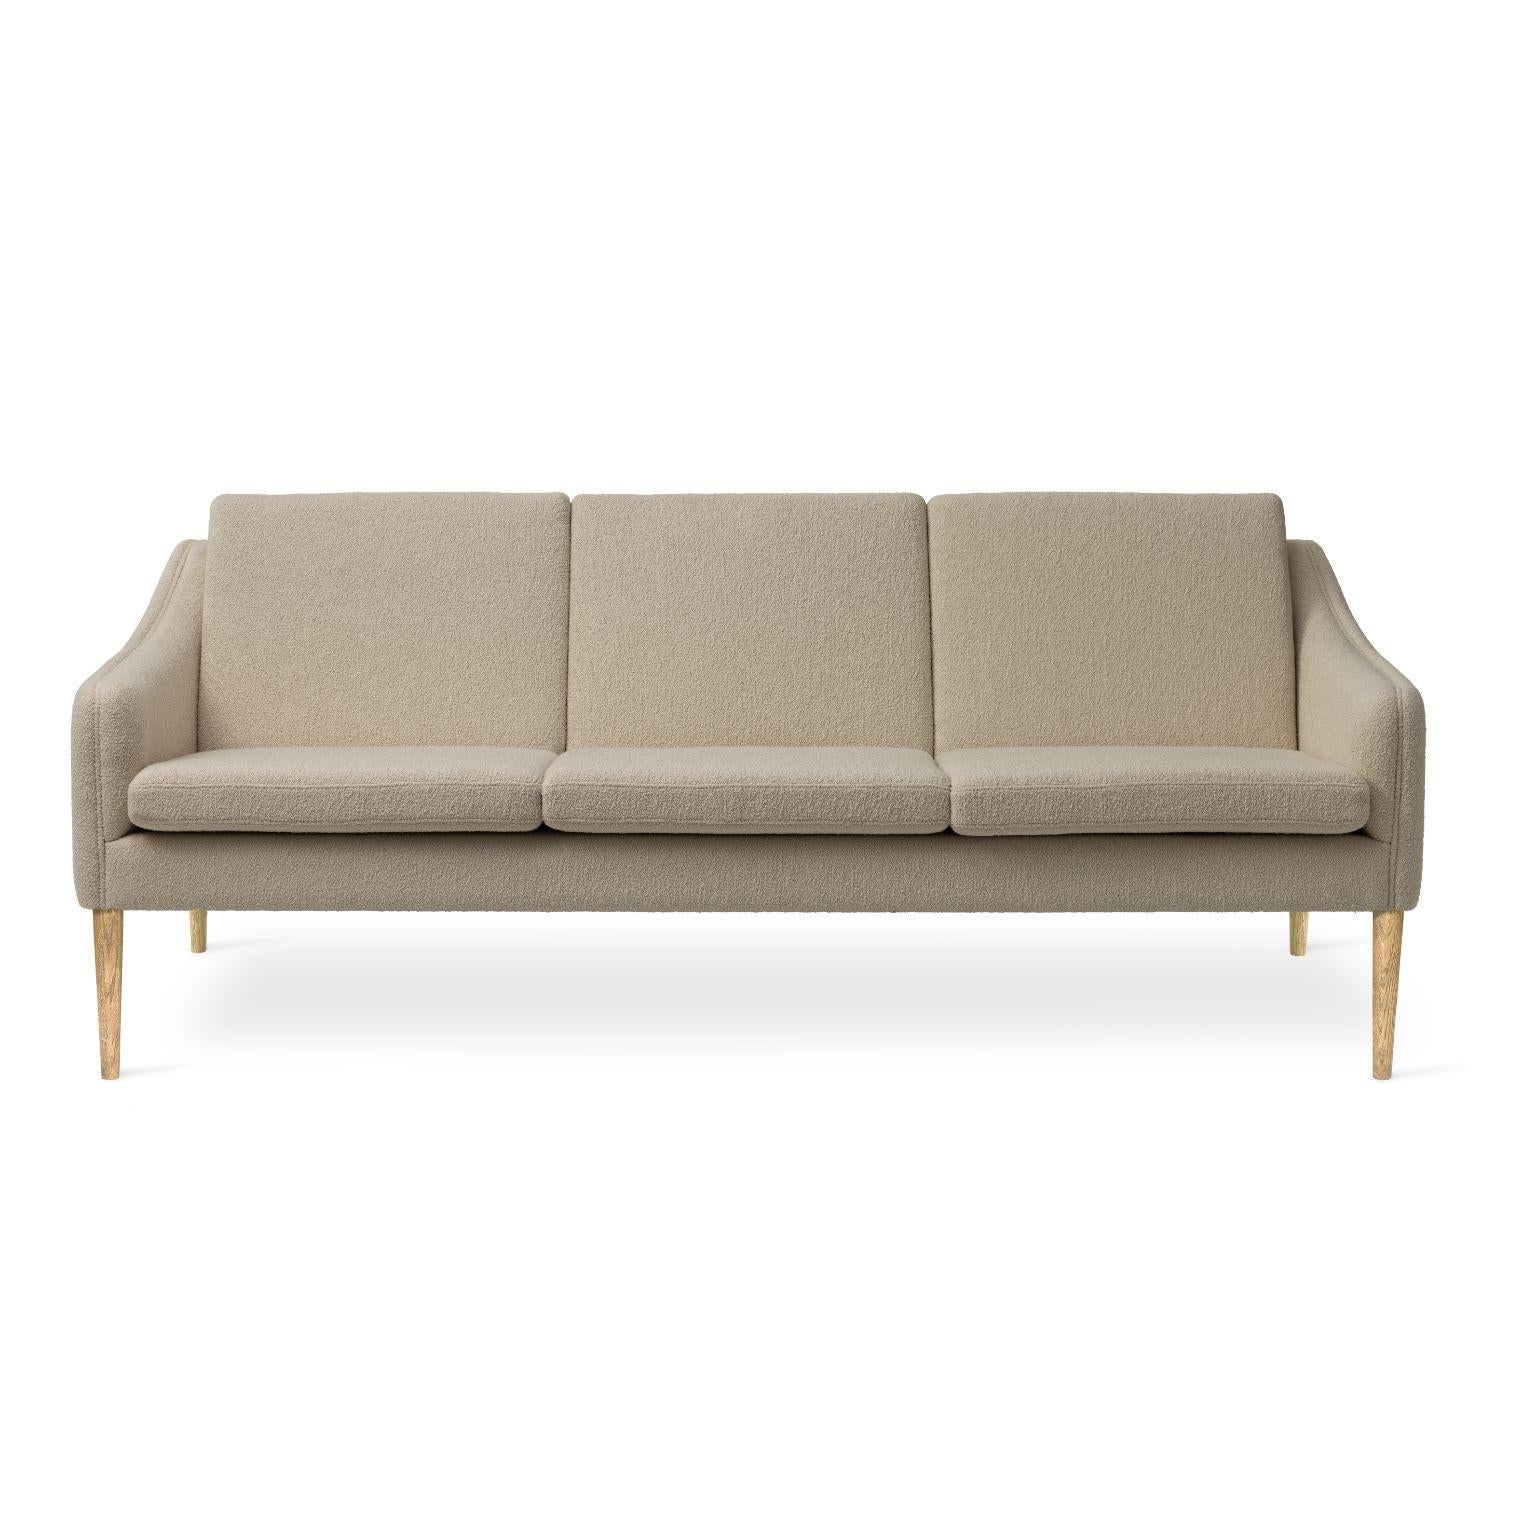 Mr Olsen 3 seater oak sand by Warm Nordic
Dimensions: D201 x W79 x H 78/46 cm
Material: Textile upholstery, Foam, Spring system, Solid oiled oak legs, Solid smoked oak legs
Weight: 50 kg
Also available in different colours and finishes. 

A